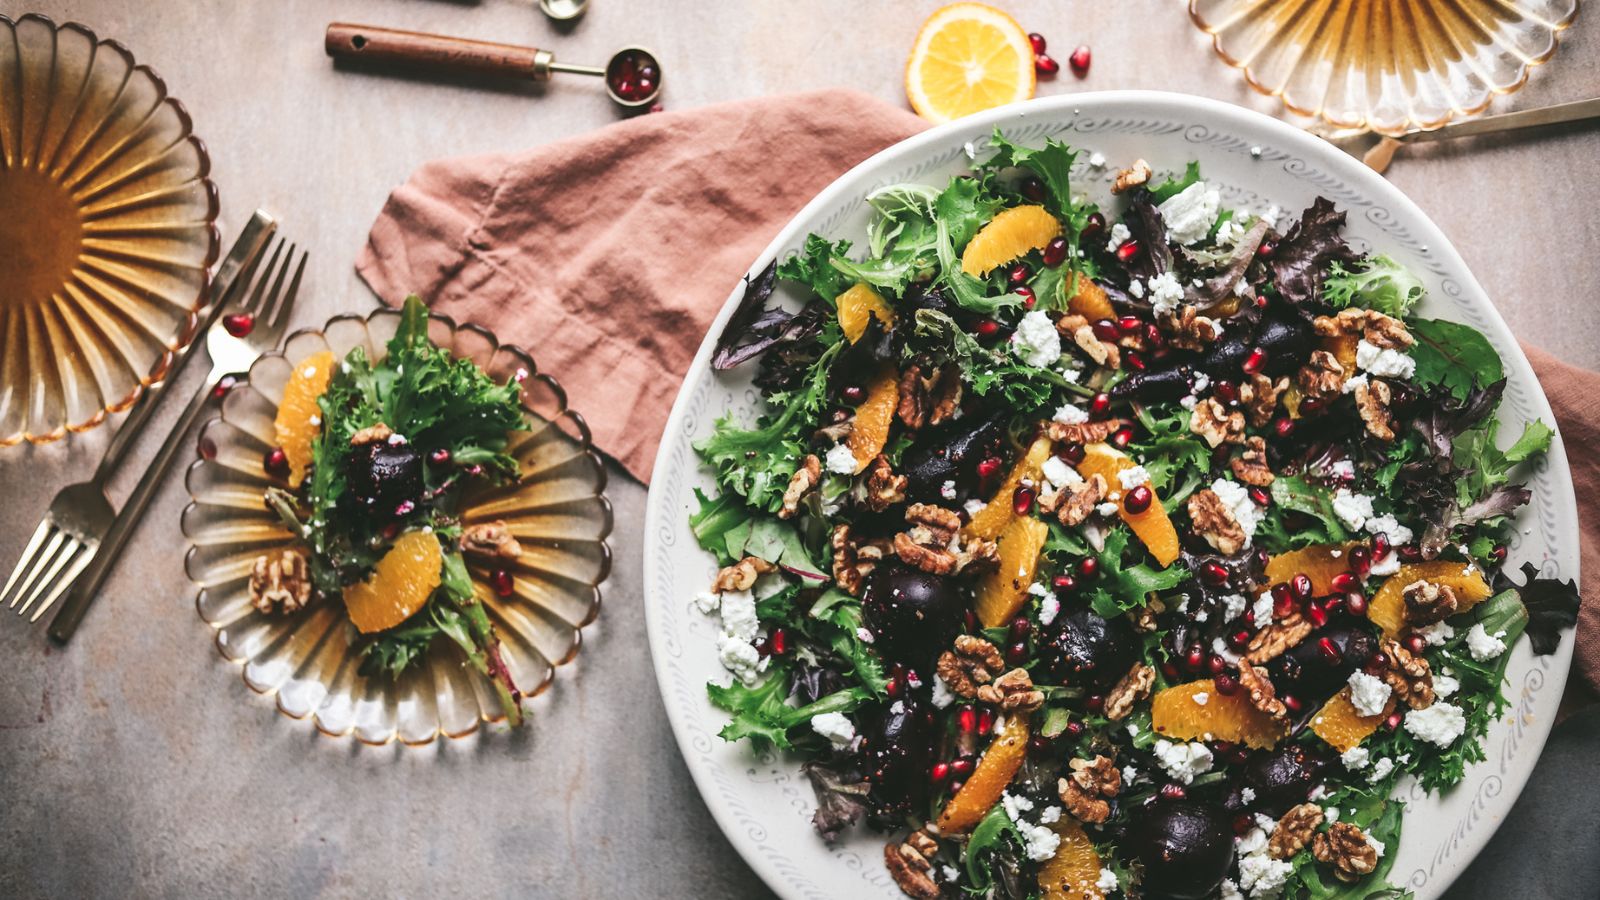 A beet salad with oranges and pomegranate seeds